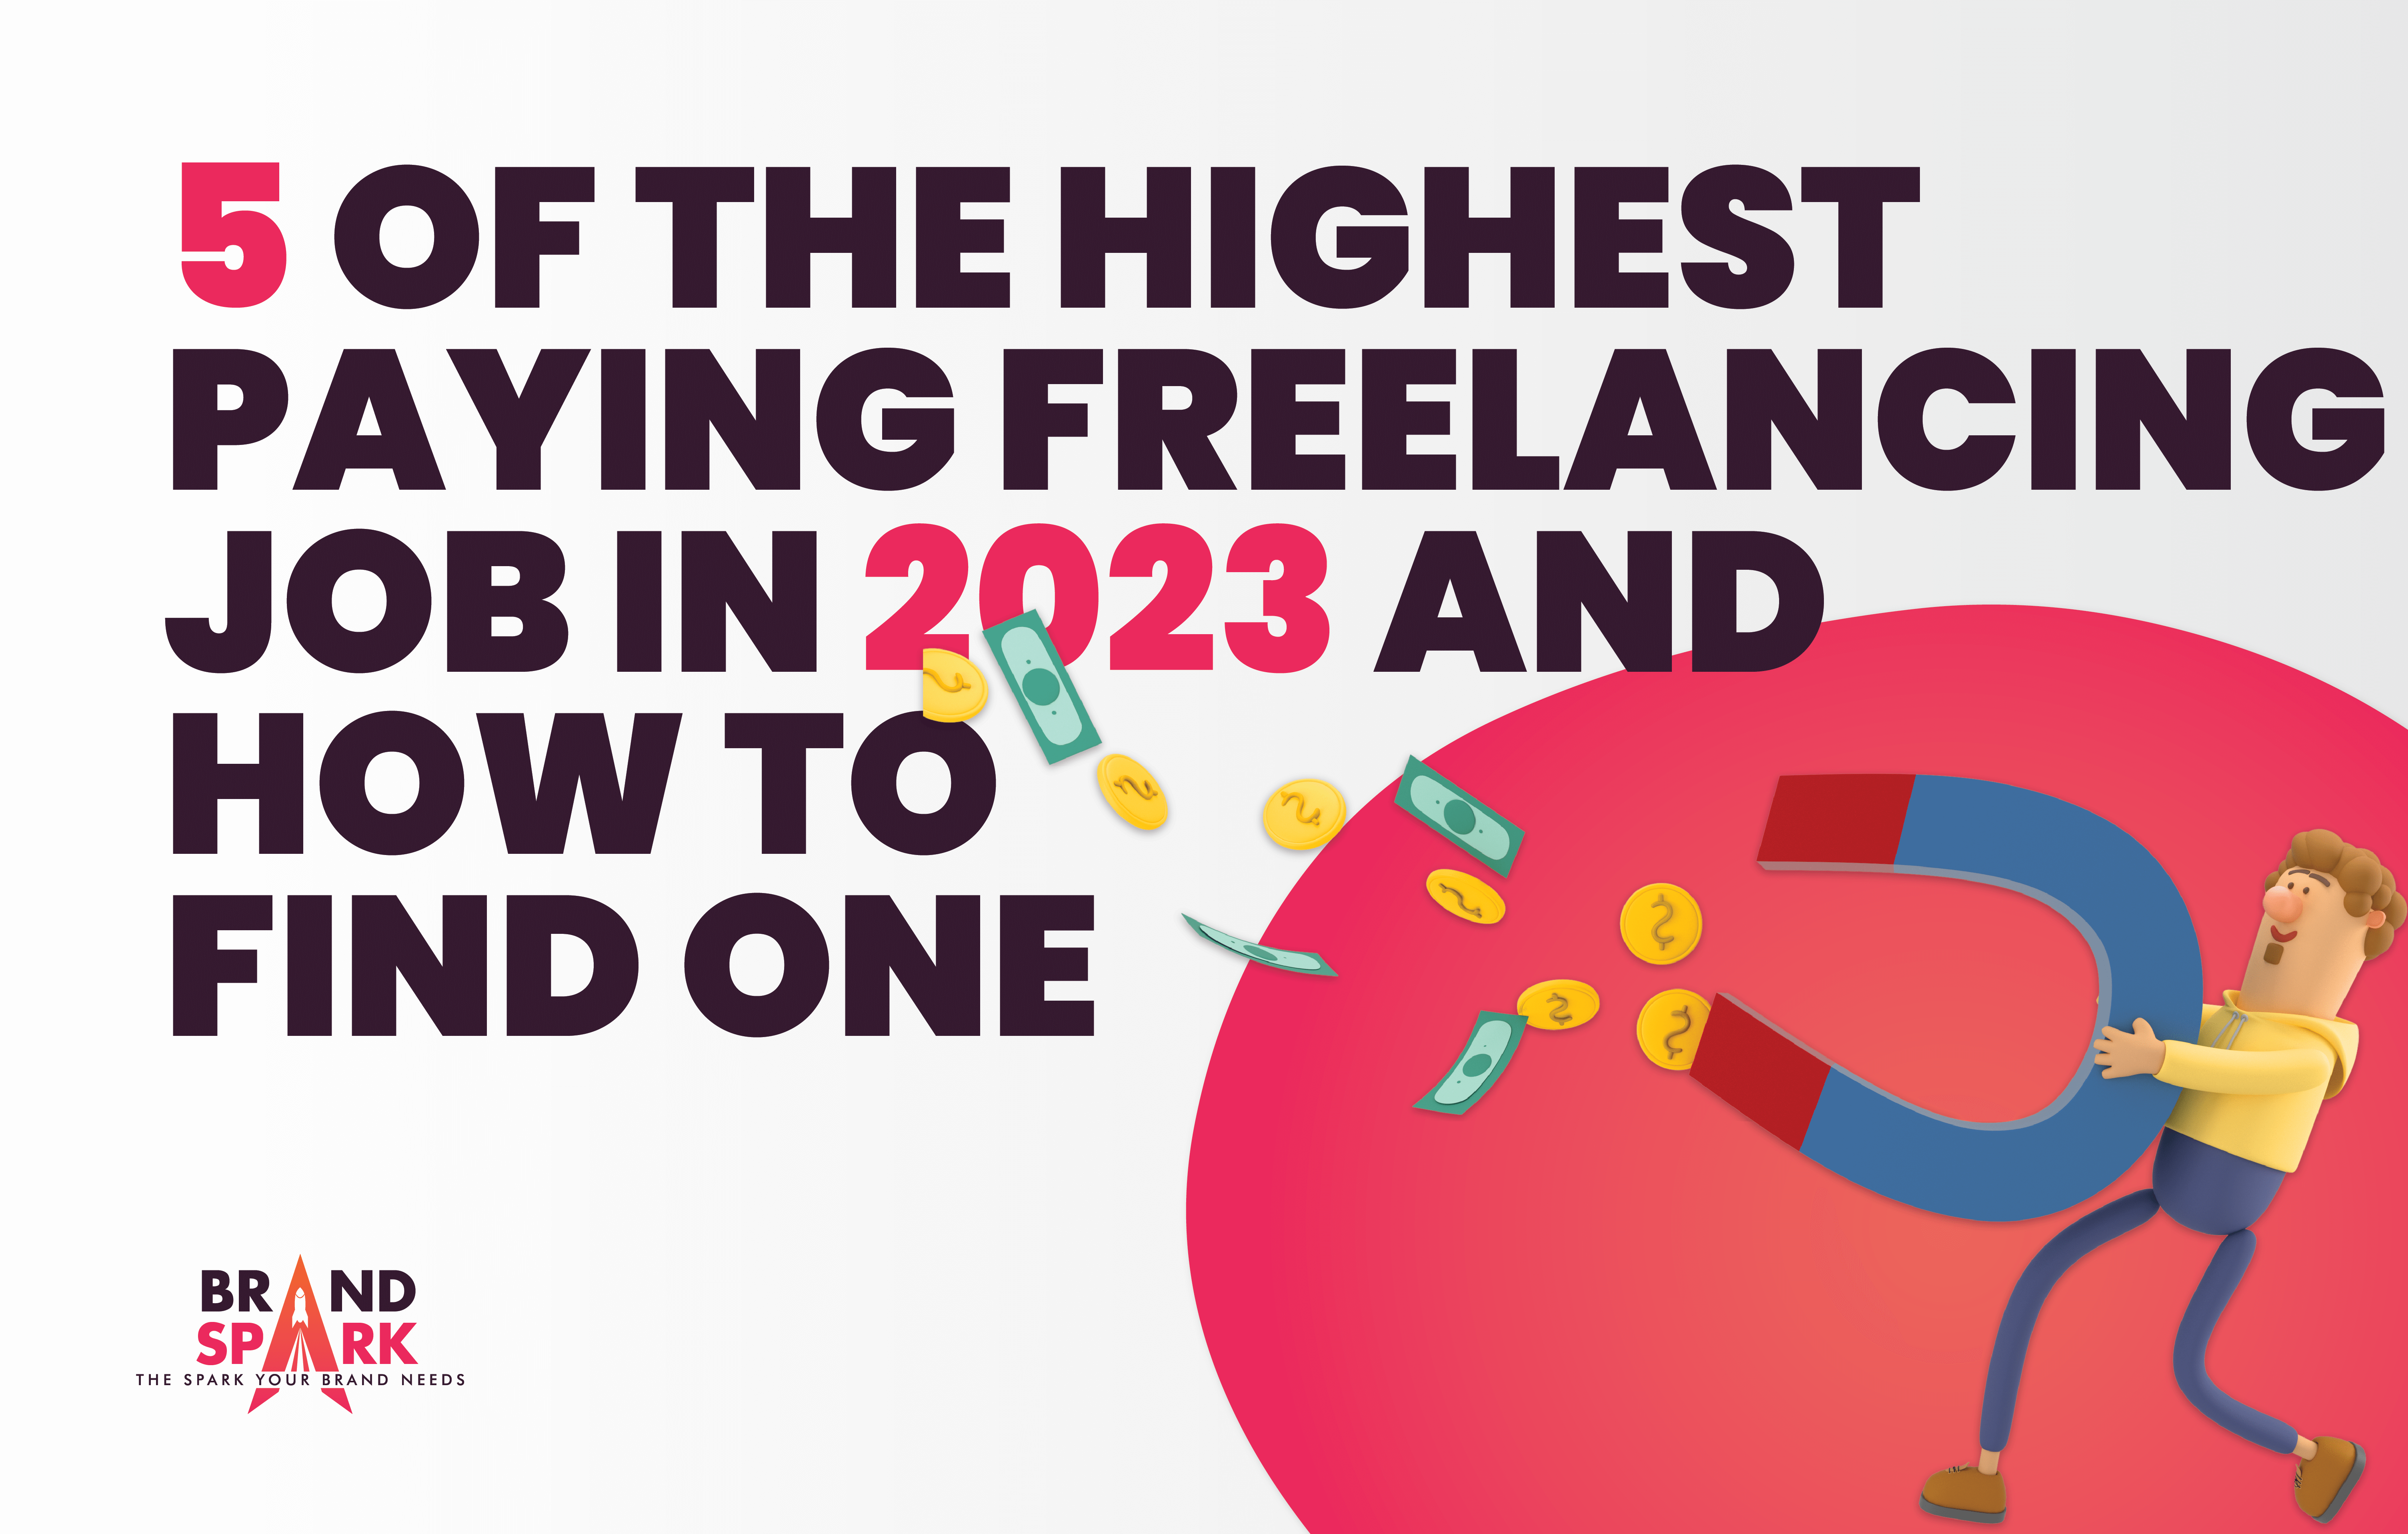 5 of the Highest-Paying Freelance Services in 2023 and How to Find One